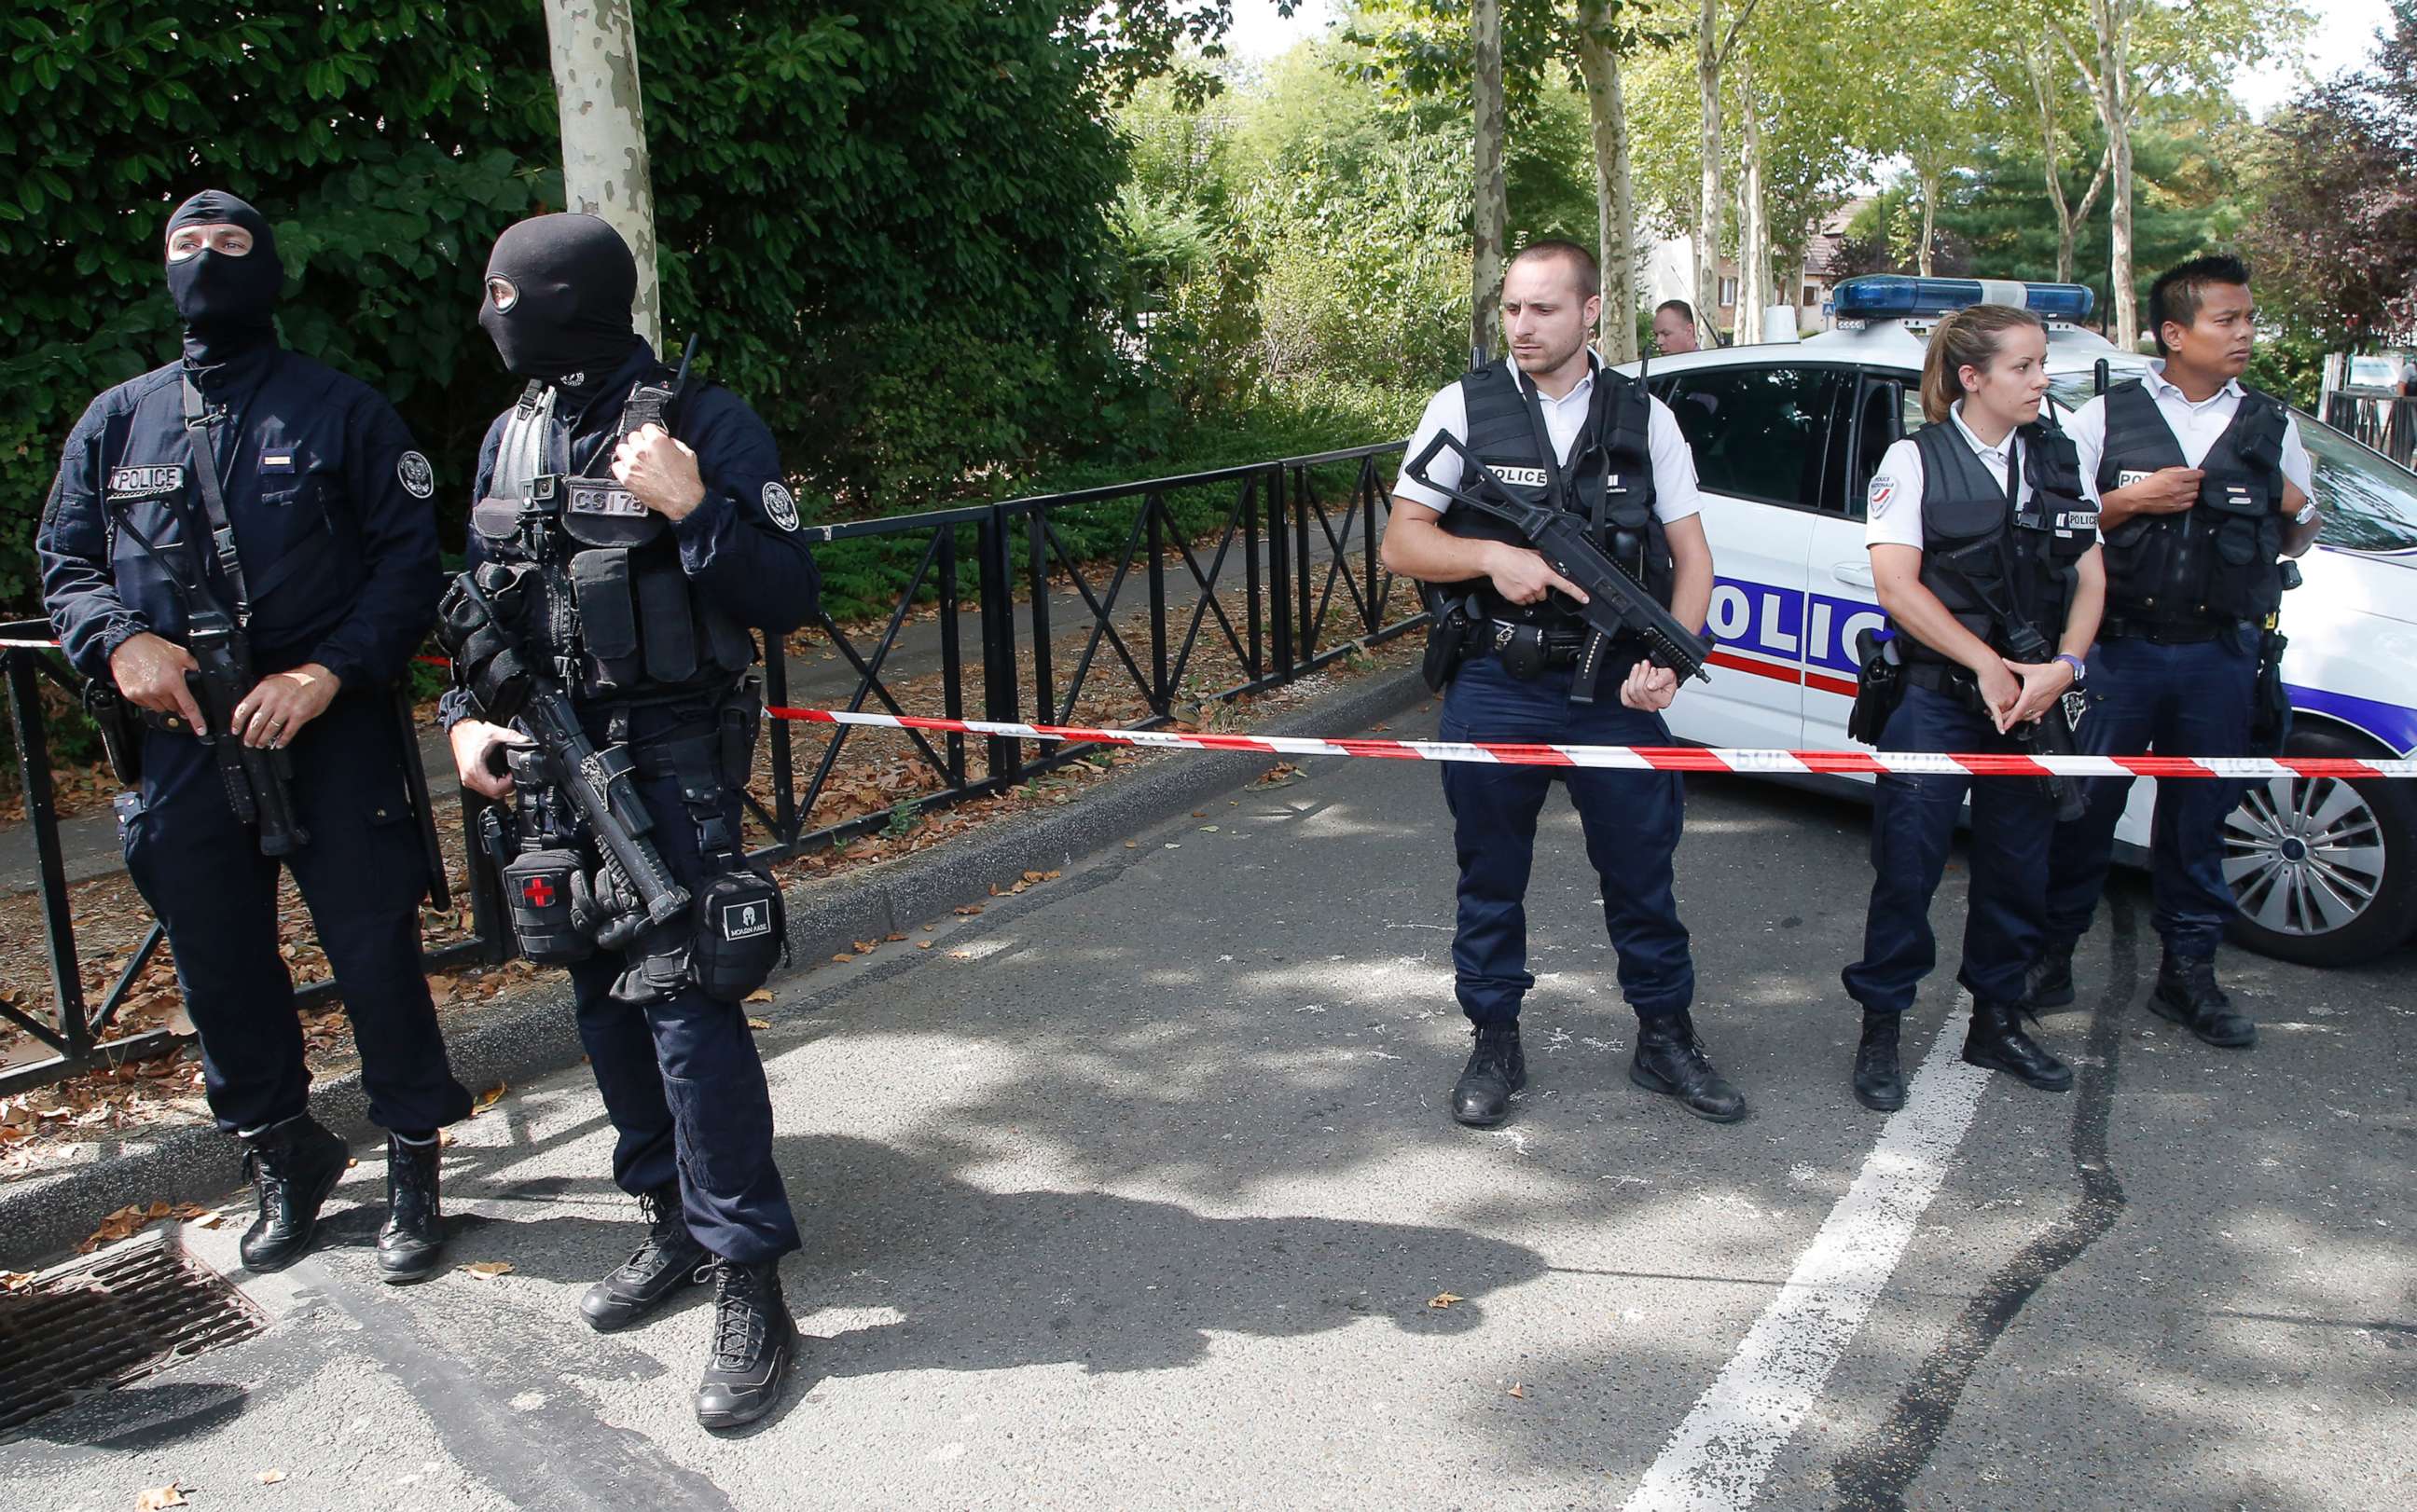 PHOTO: French police officers guard the area with other police officers after a knife attack Aug. 23, 2018 in Trappes, west of Paris.